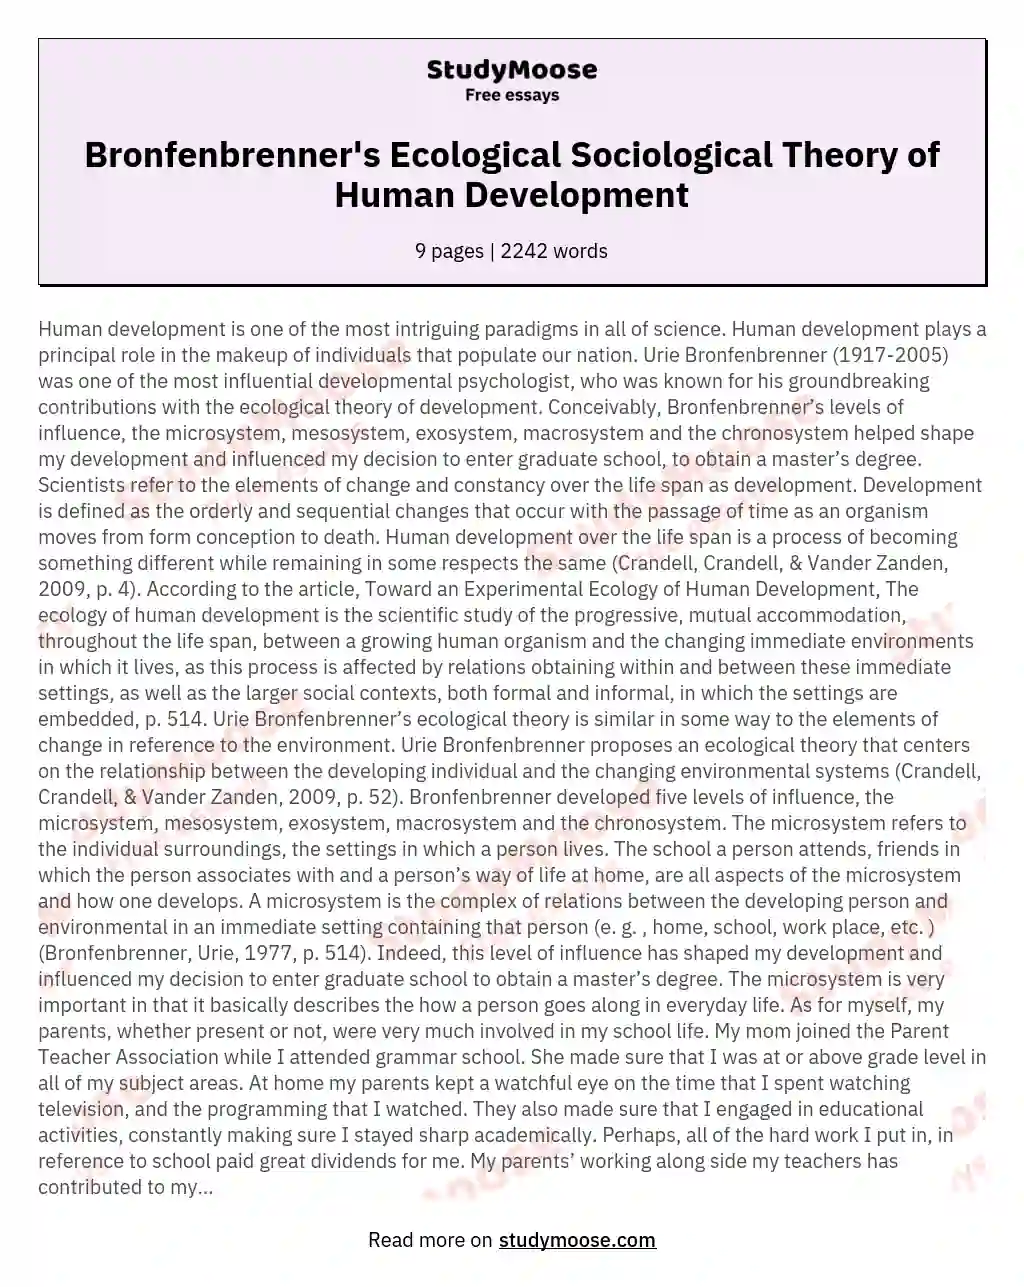 Bronfenbrenner's Ecological Sociological Theory of Human Development essay